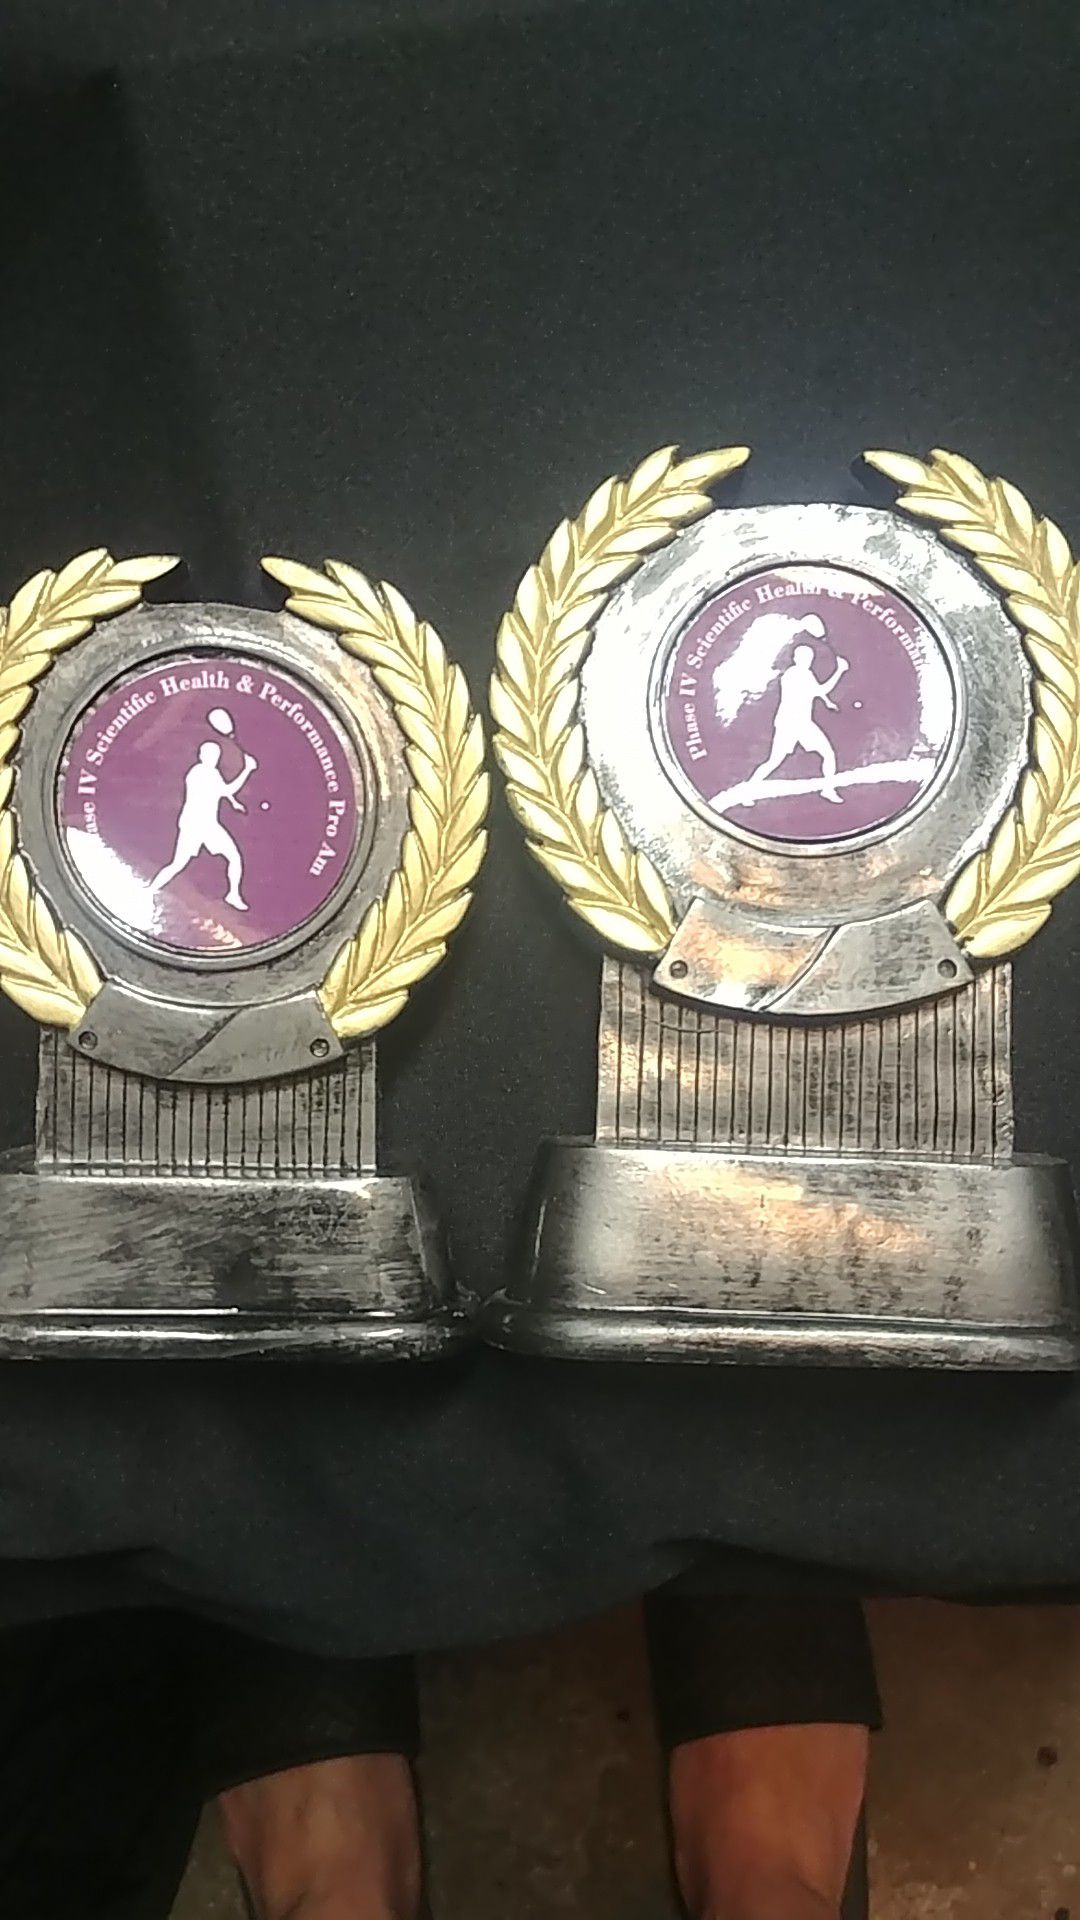 1st and 2nd place trophies 10 of each